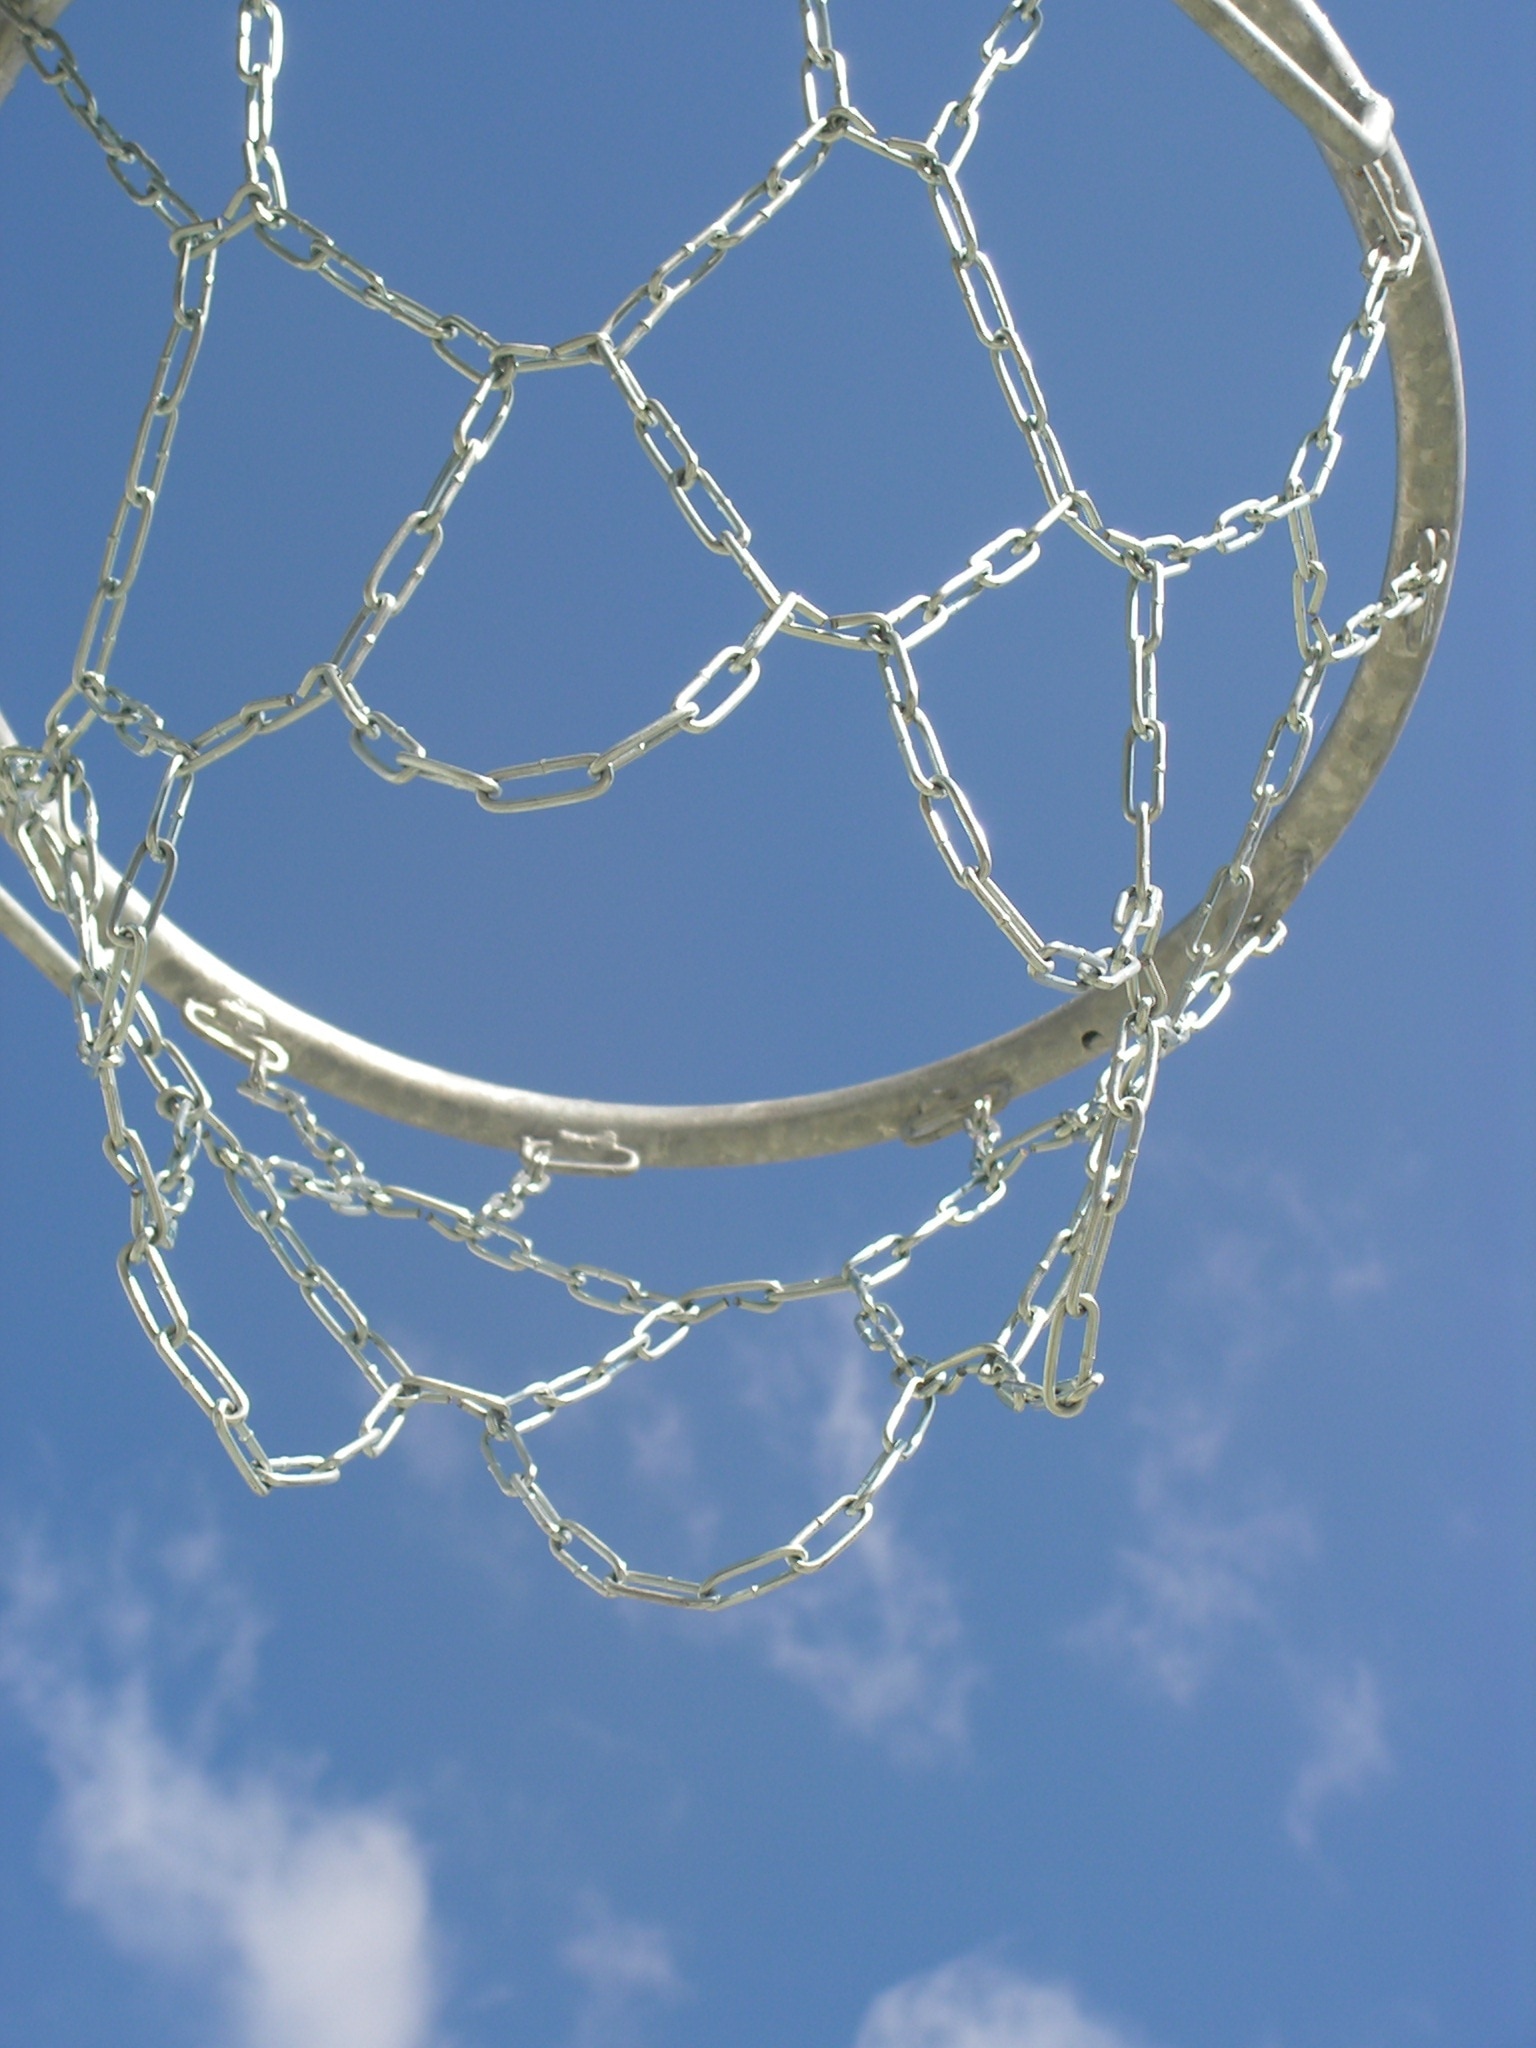 Low angle photography of white basketball hoop